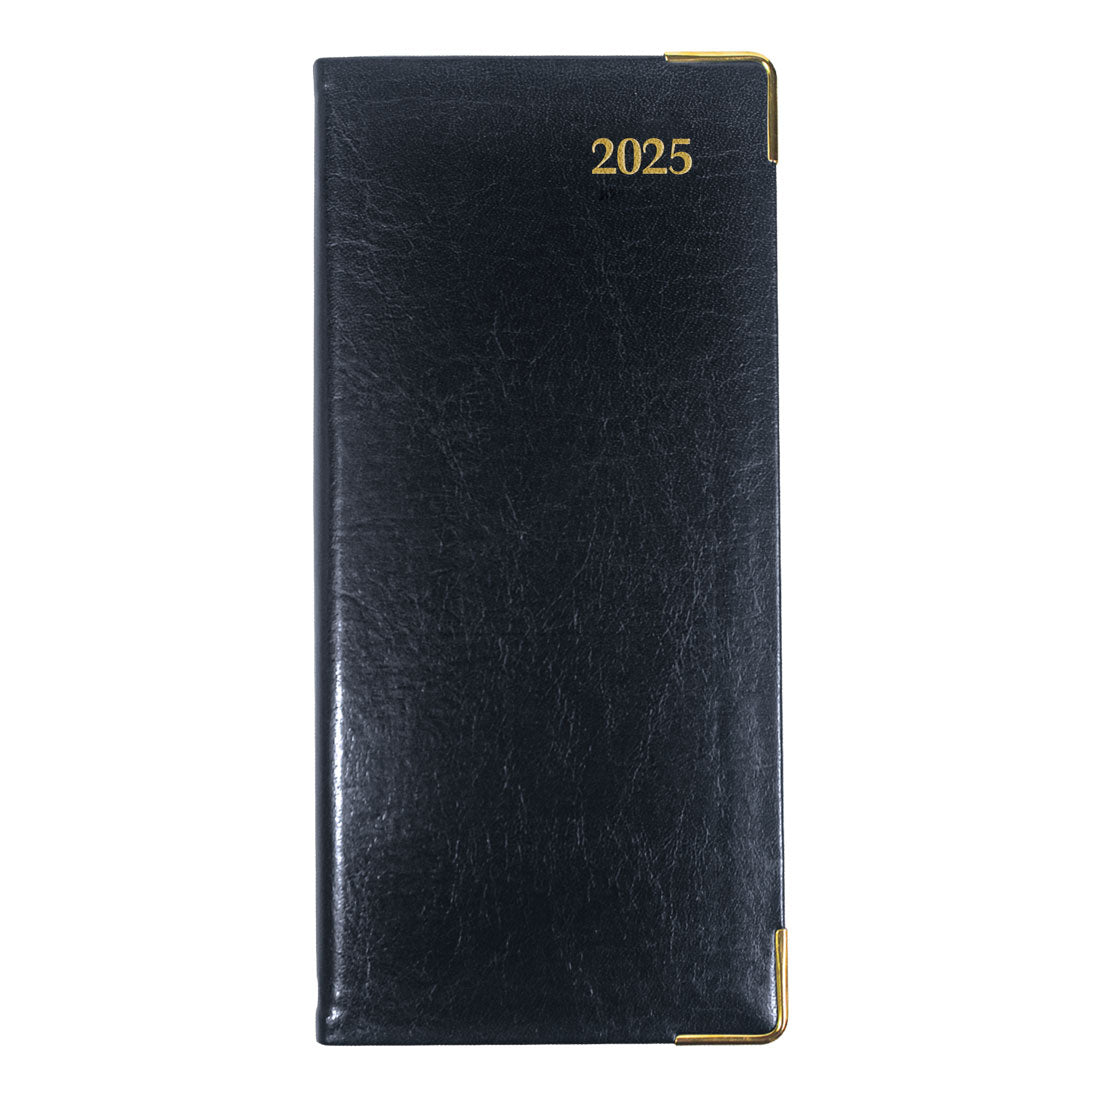 Executive Weekly Pocket Planner 2025, Assorted colors, CBE306.ASX